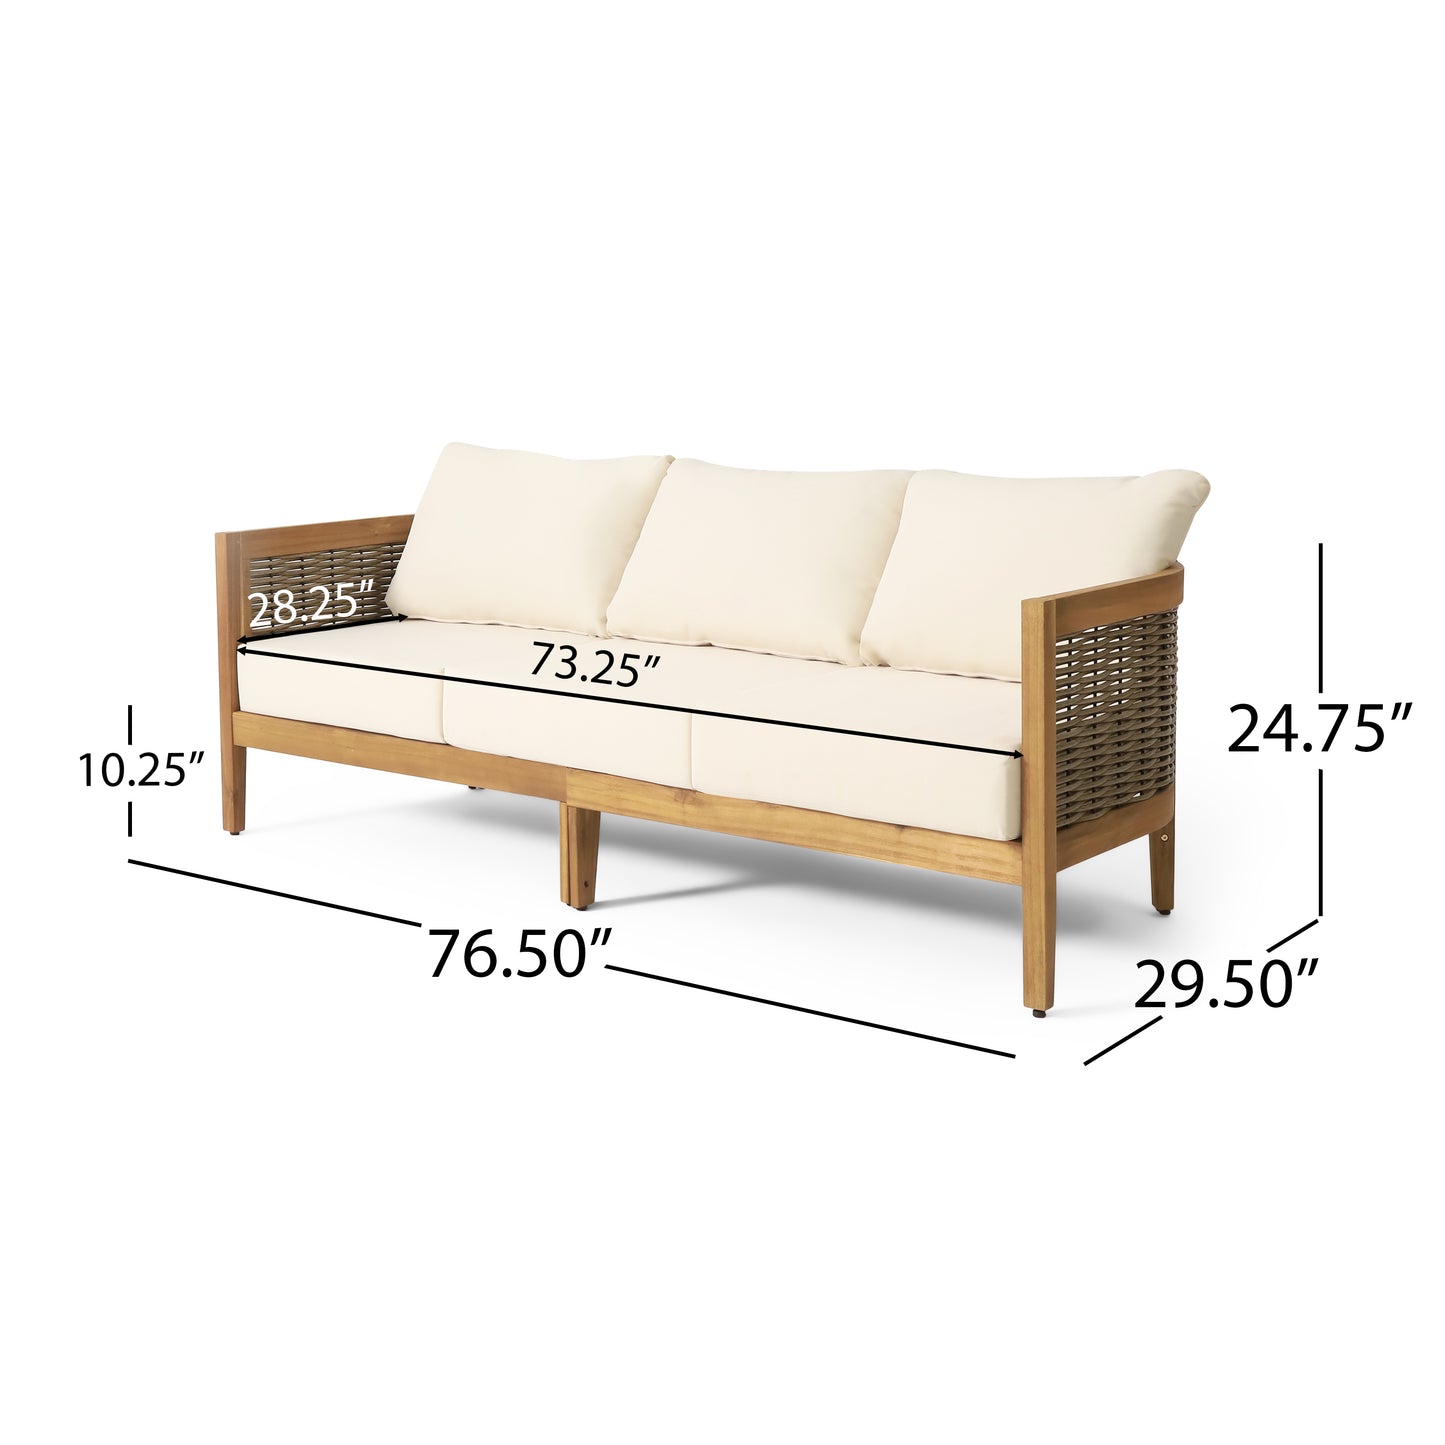 The Crowne Collection Outdoor Acacia Wood and Round Wicker 3 Seater Sofa with Cushions, Teak, Mixed Brown, and Beige